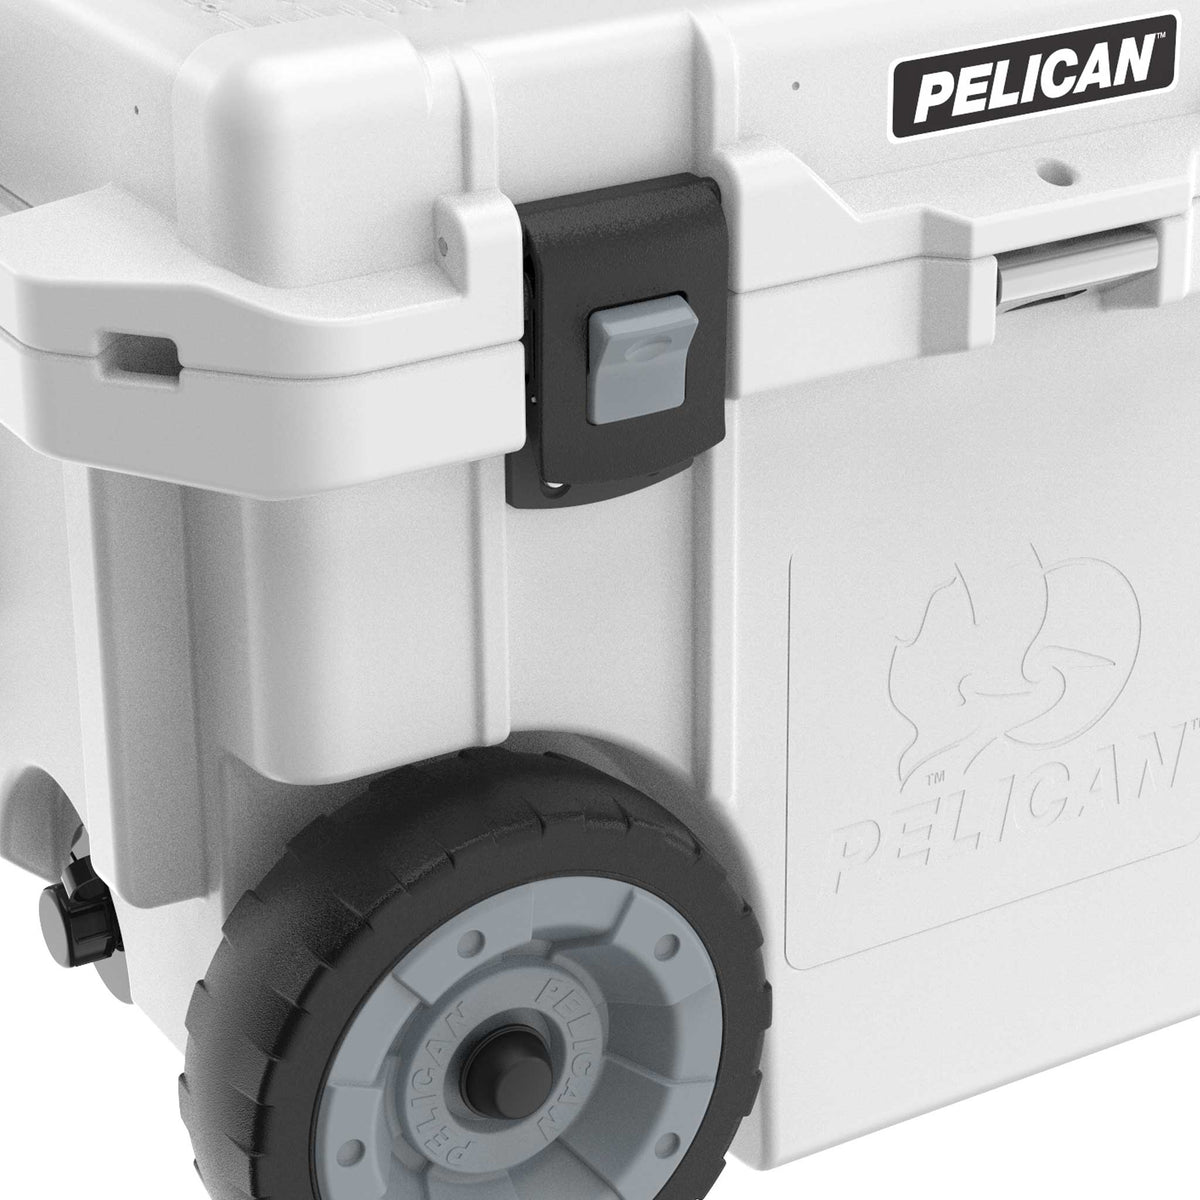 Pelican 45QT Elite Wheeled Cooler has easy to use press &amp; pull latches